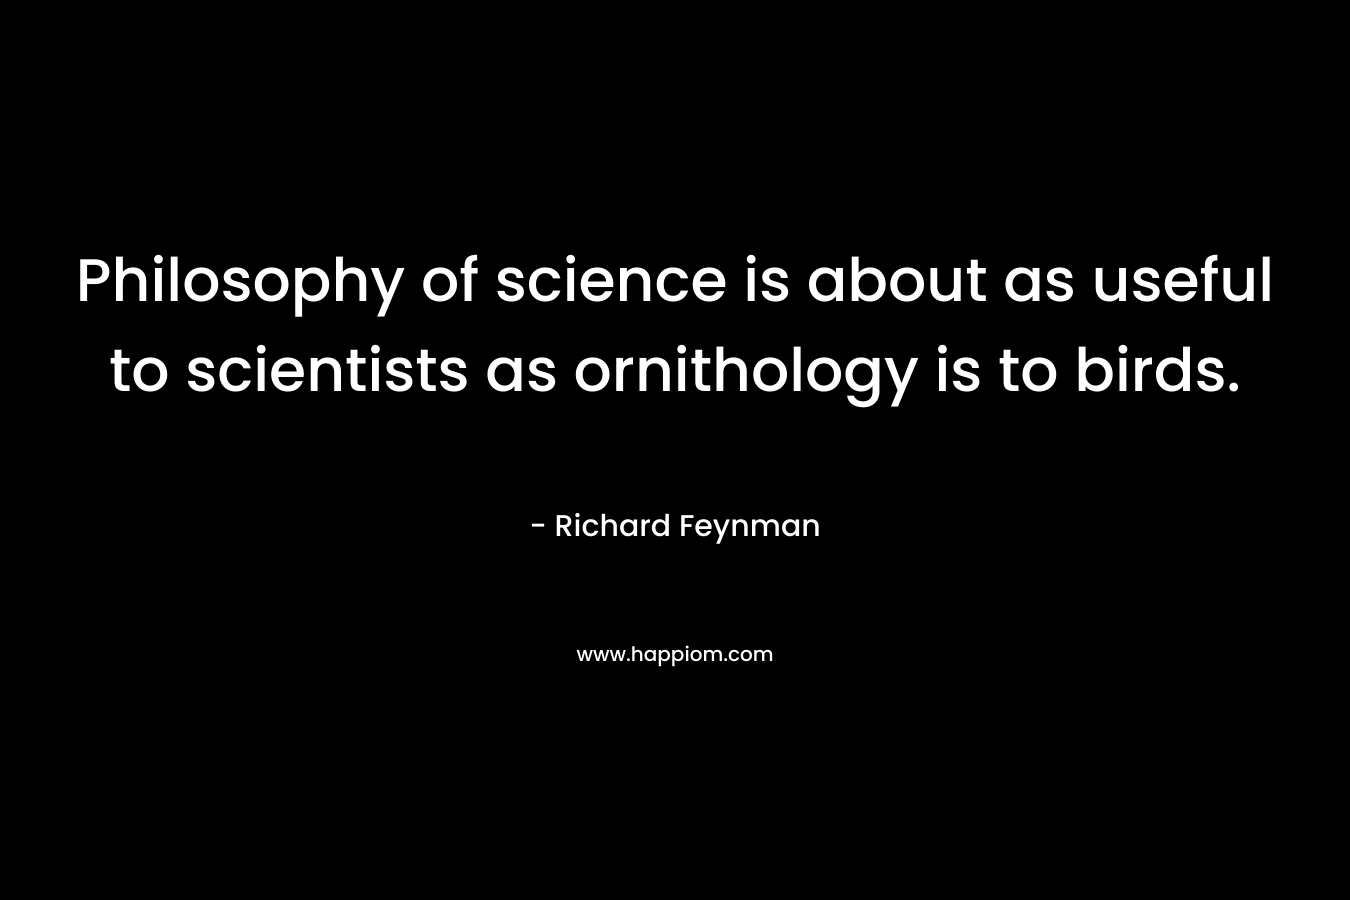 Philosophy of science is about as useful to scientists as ornithology is to birds.